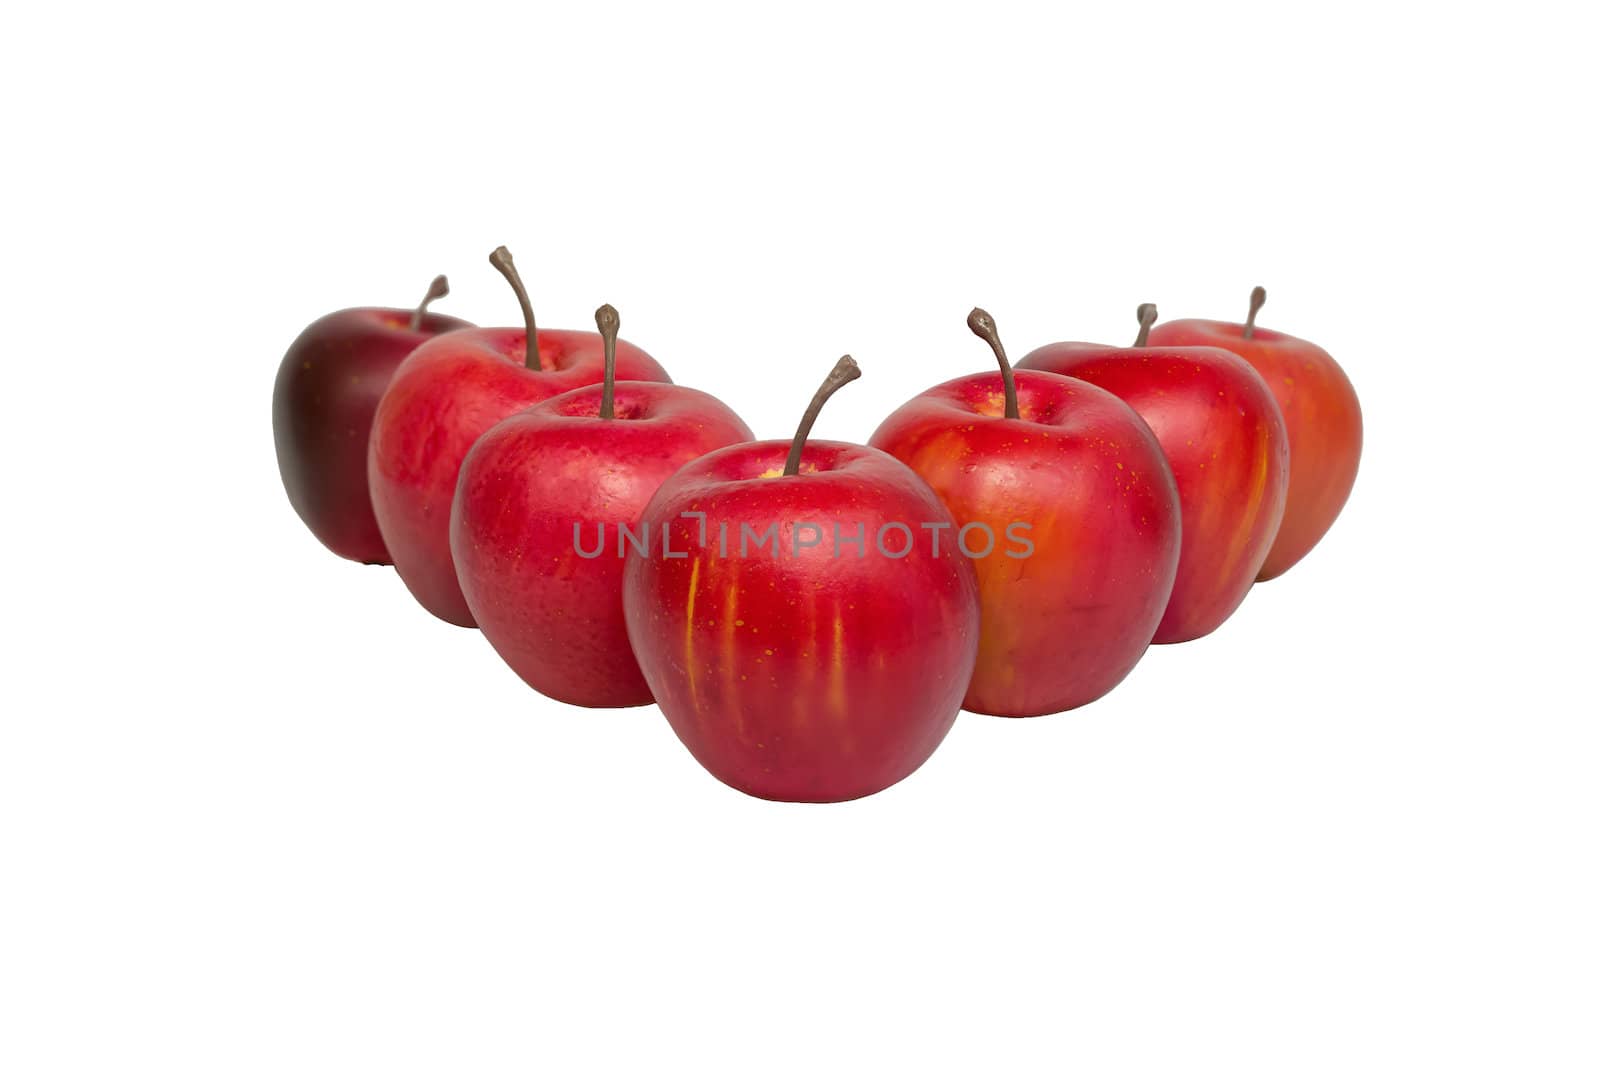 Seven red apples are arranged in a V-shape formation.